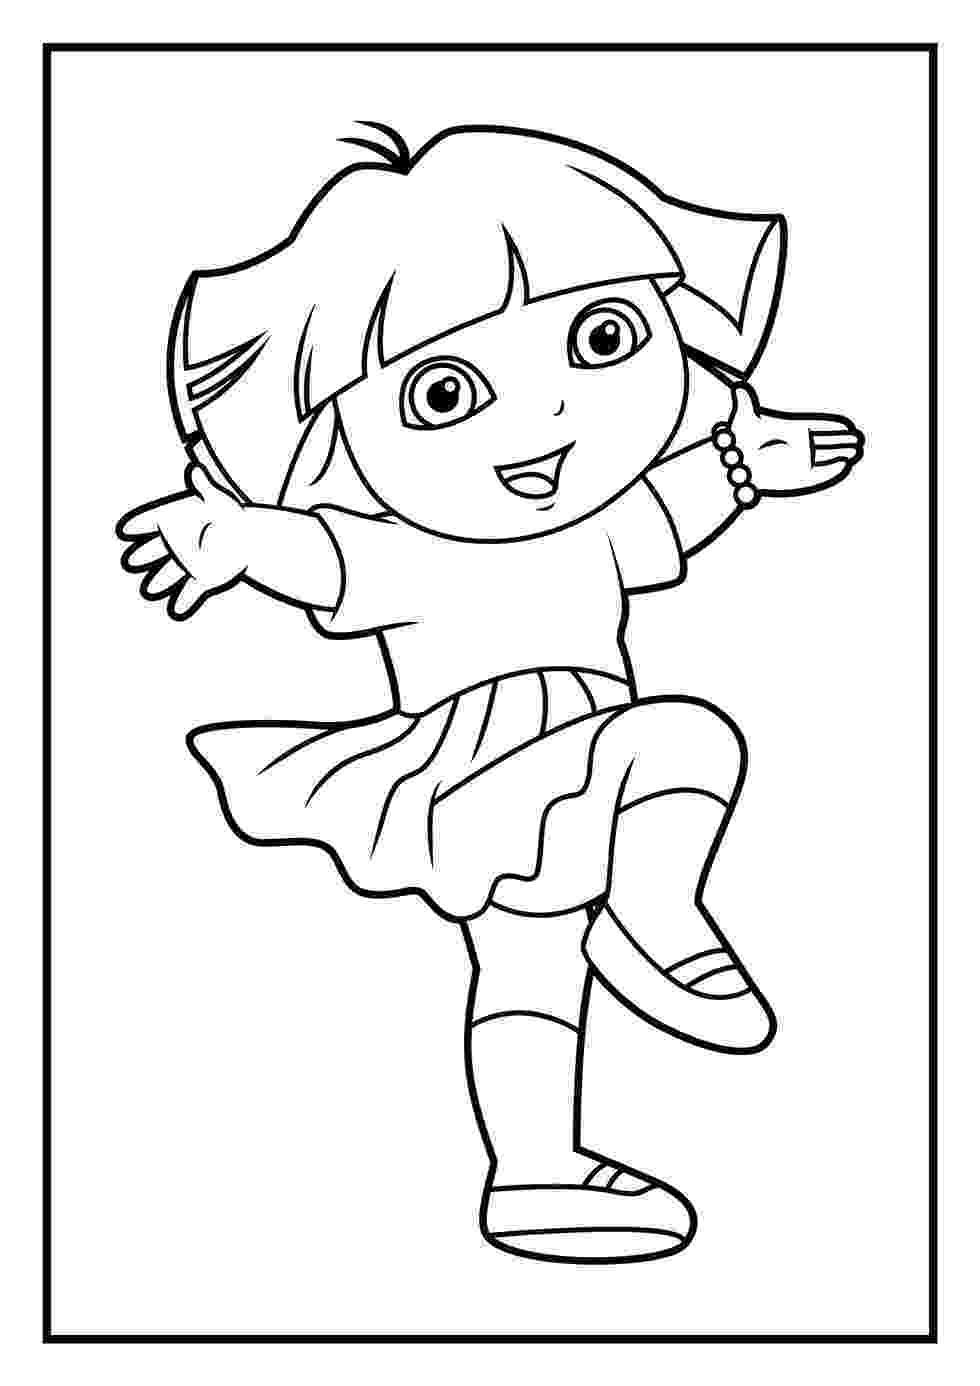 dora colouring free printable dora coloring pages for kids cool2bkids dora colouring 